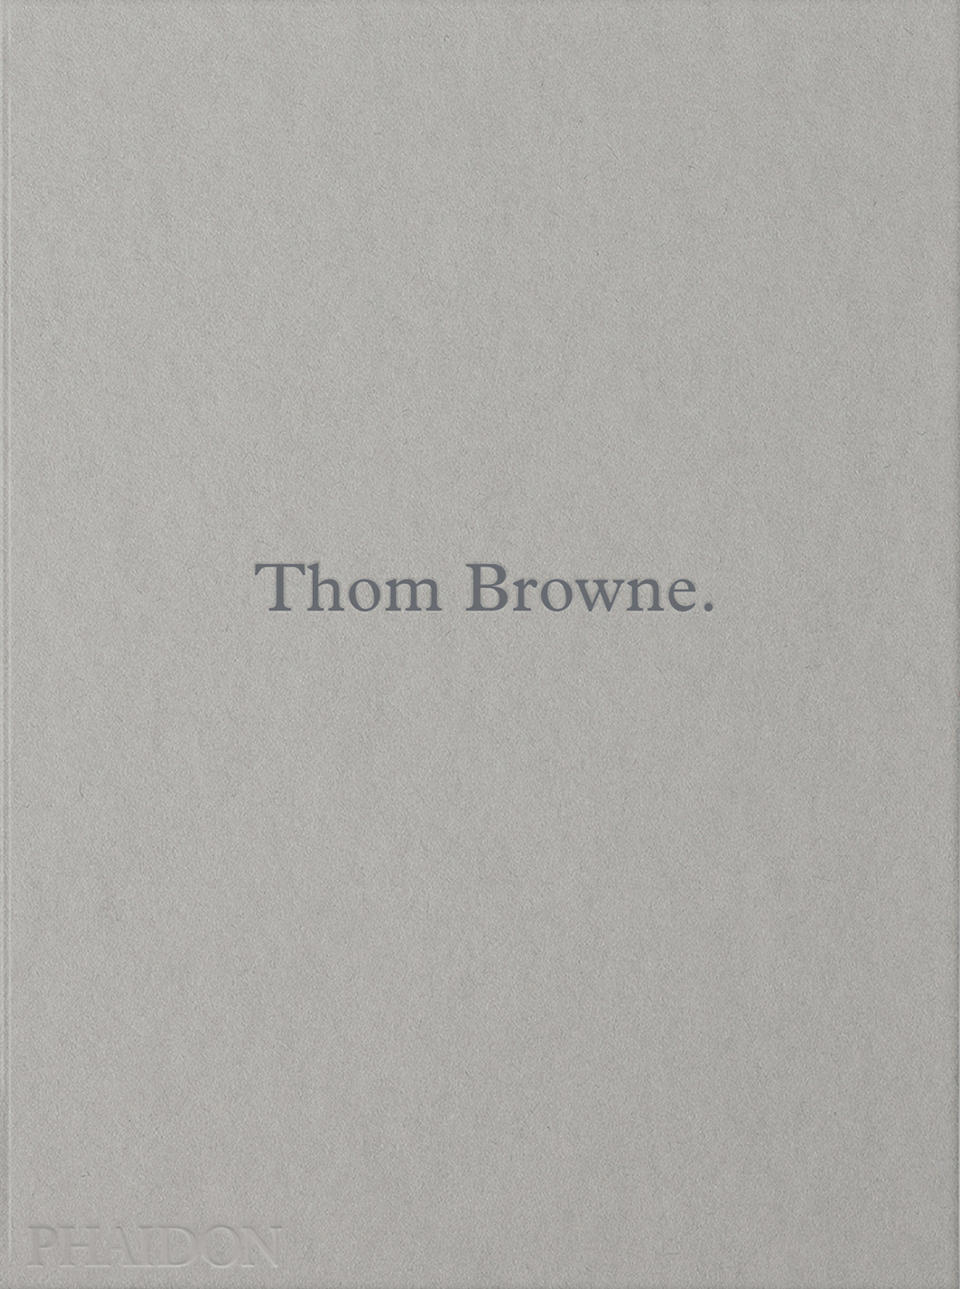 This cover image released by Phaidon shows “Thom Browne,” by Thom Browne and Andrew Bolton. (Phaidon via AP)